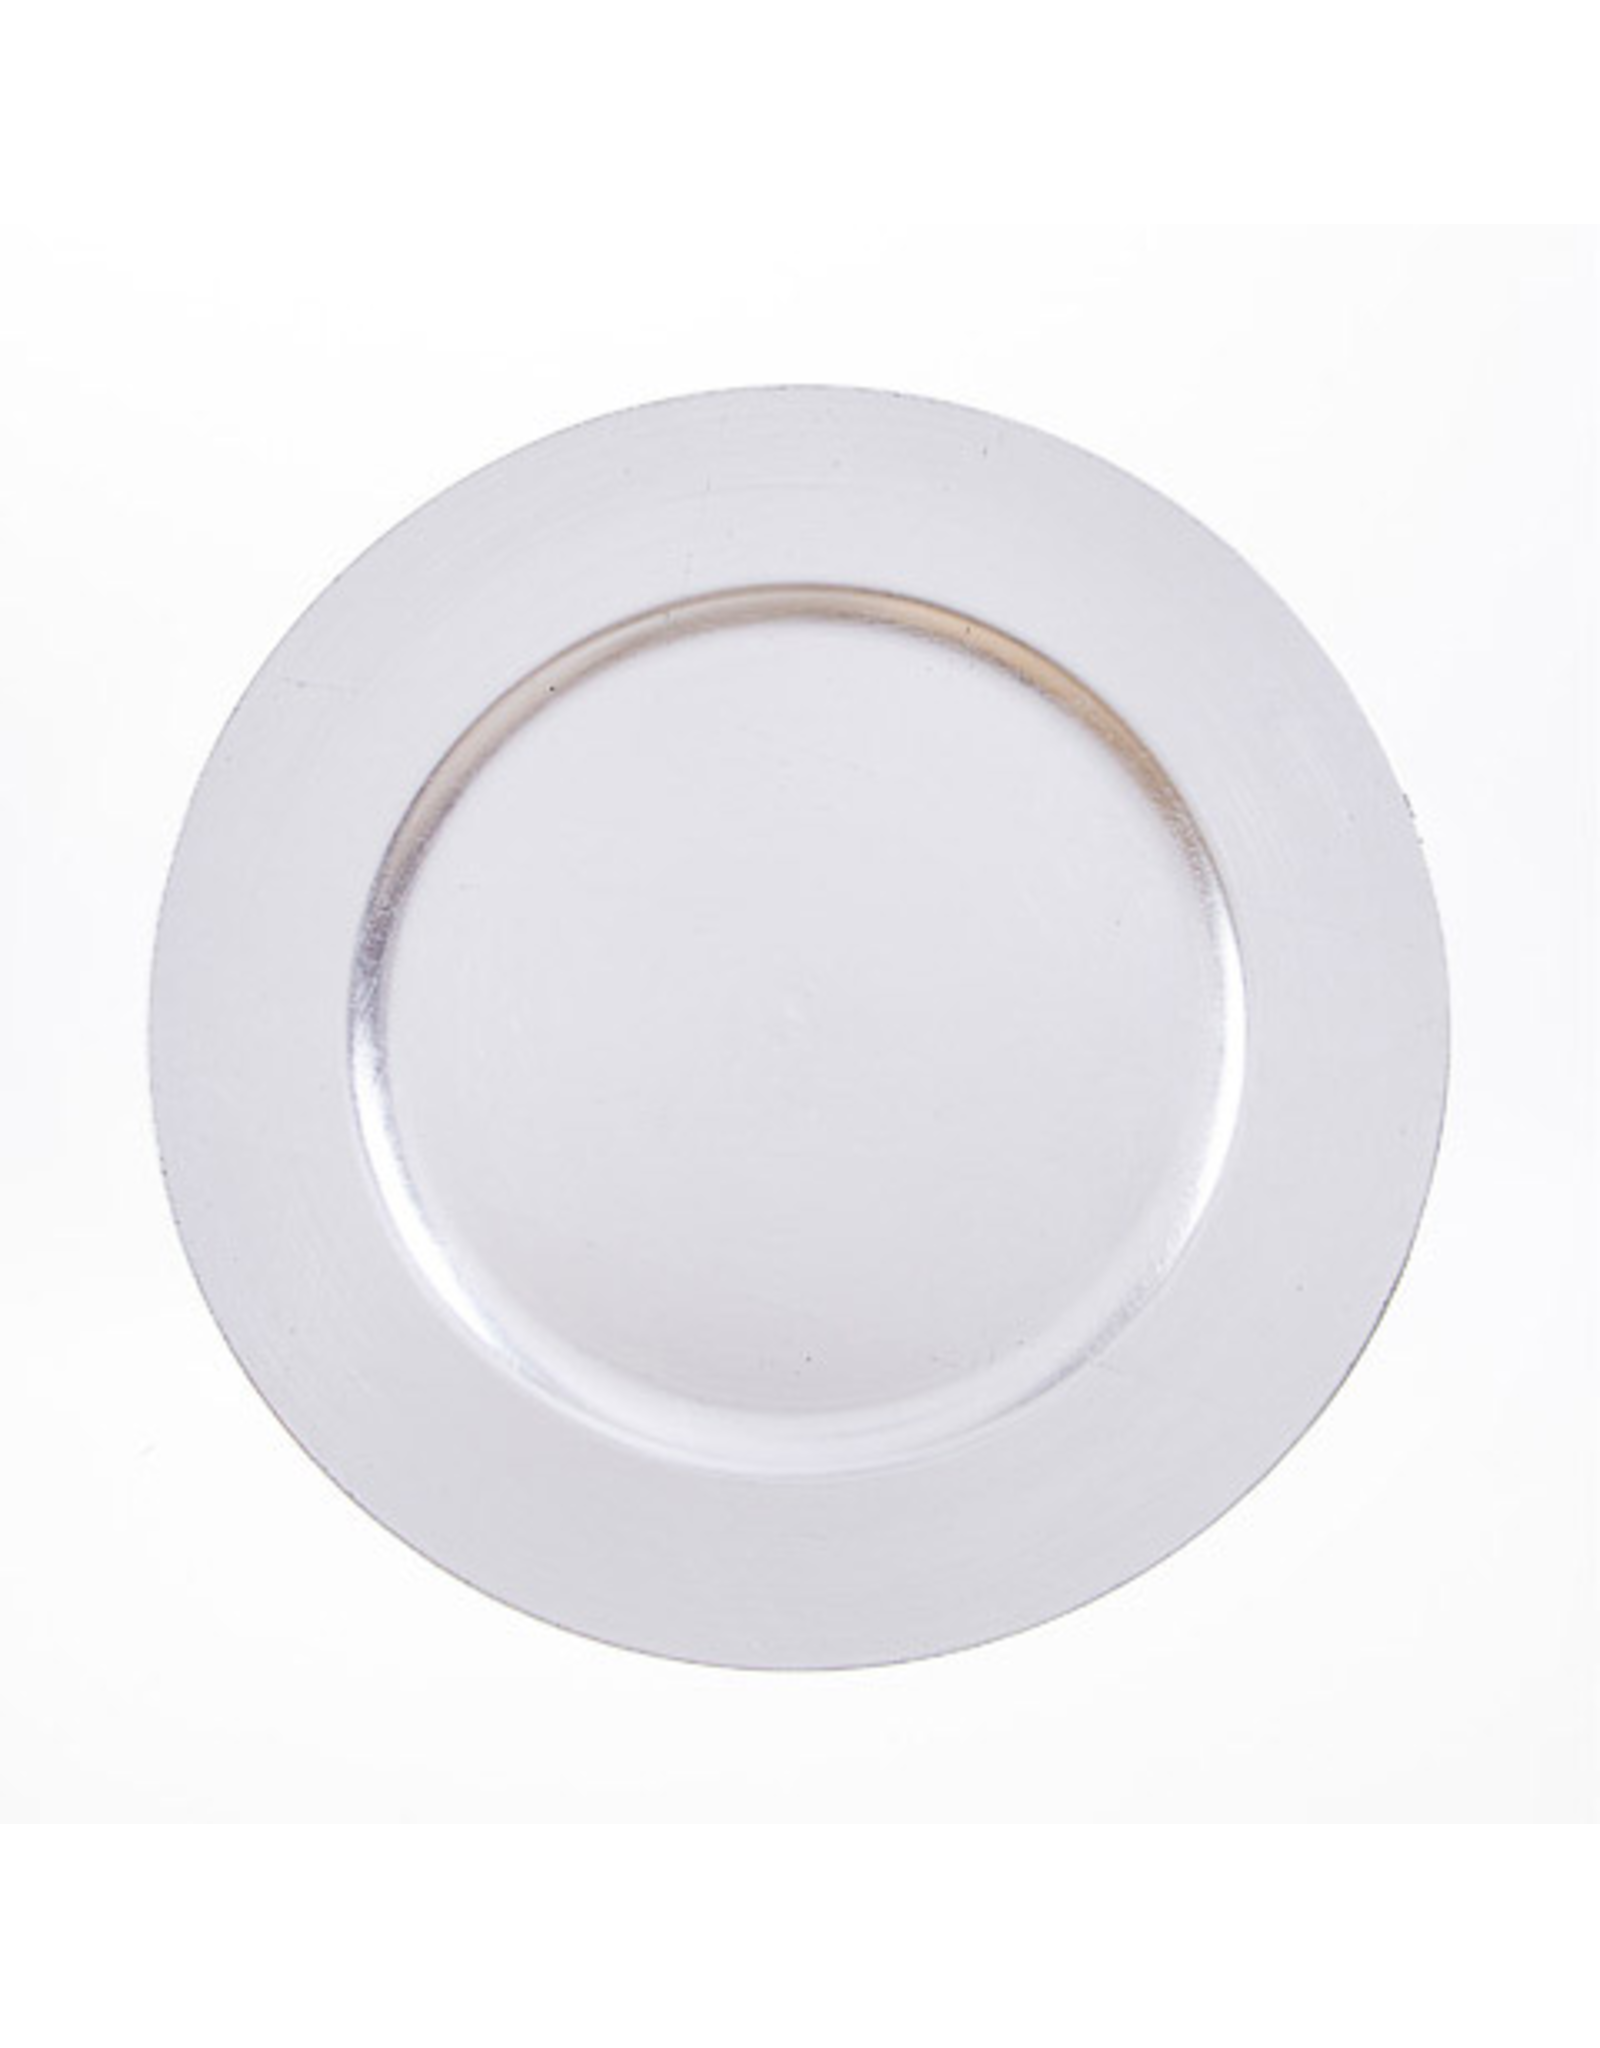 Darice Charger Plates 13 inch Pack of 6 - Silver